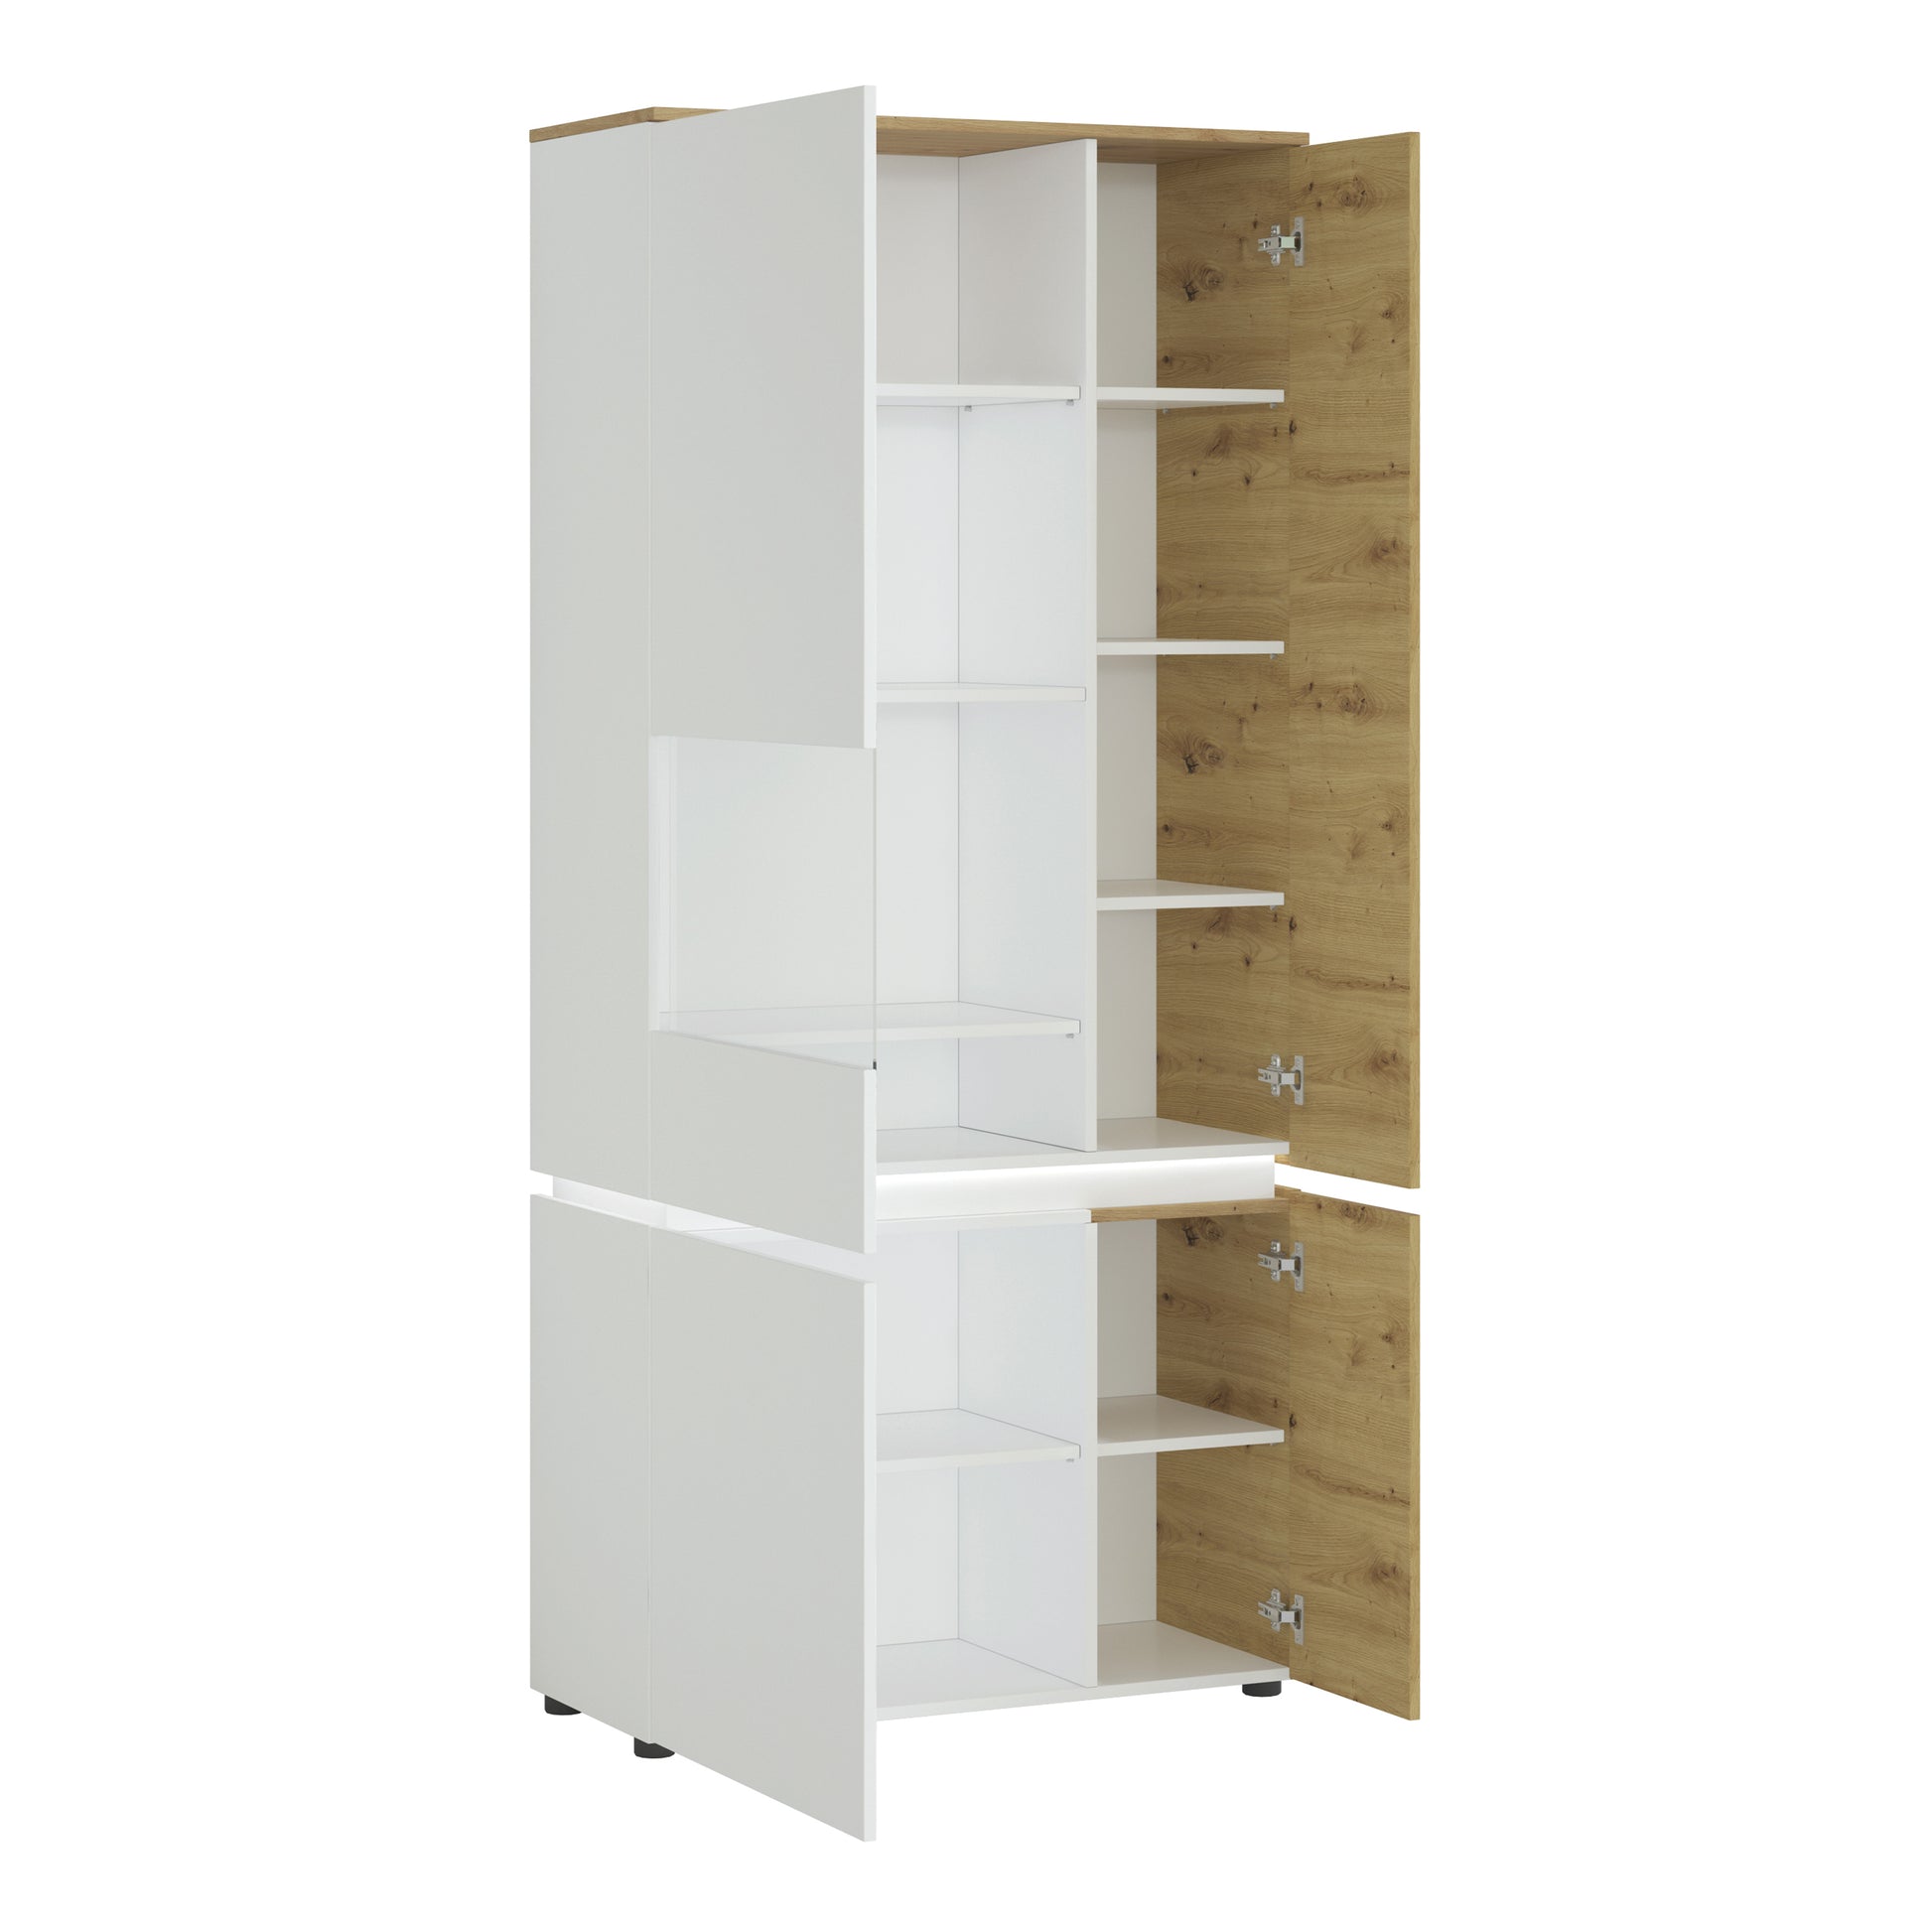 Luci Bright Luci 4 door tall display cabinet LH (including LED lighting) in White and Oak